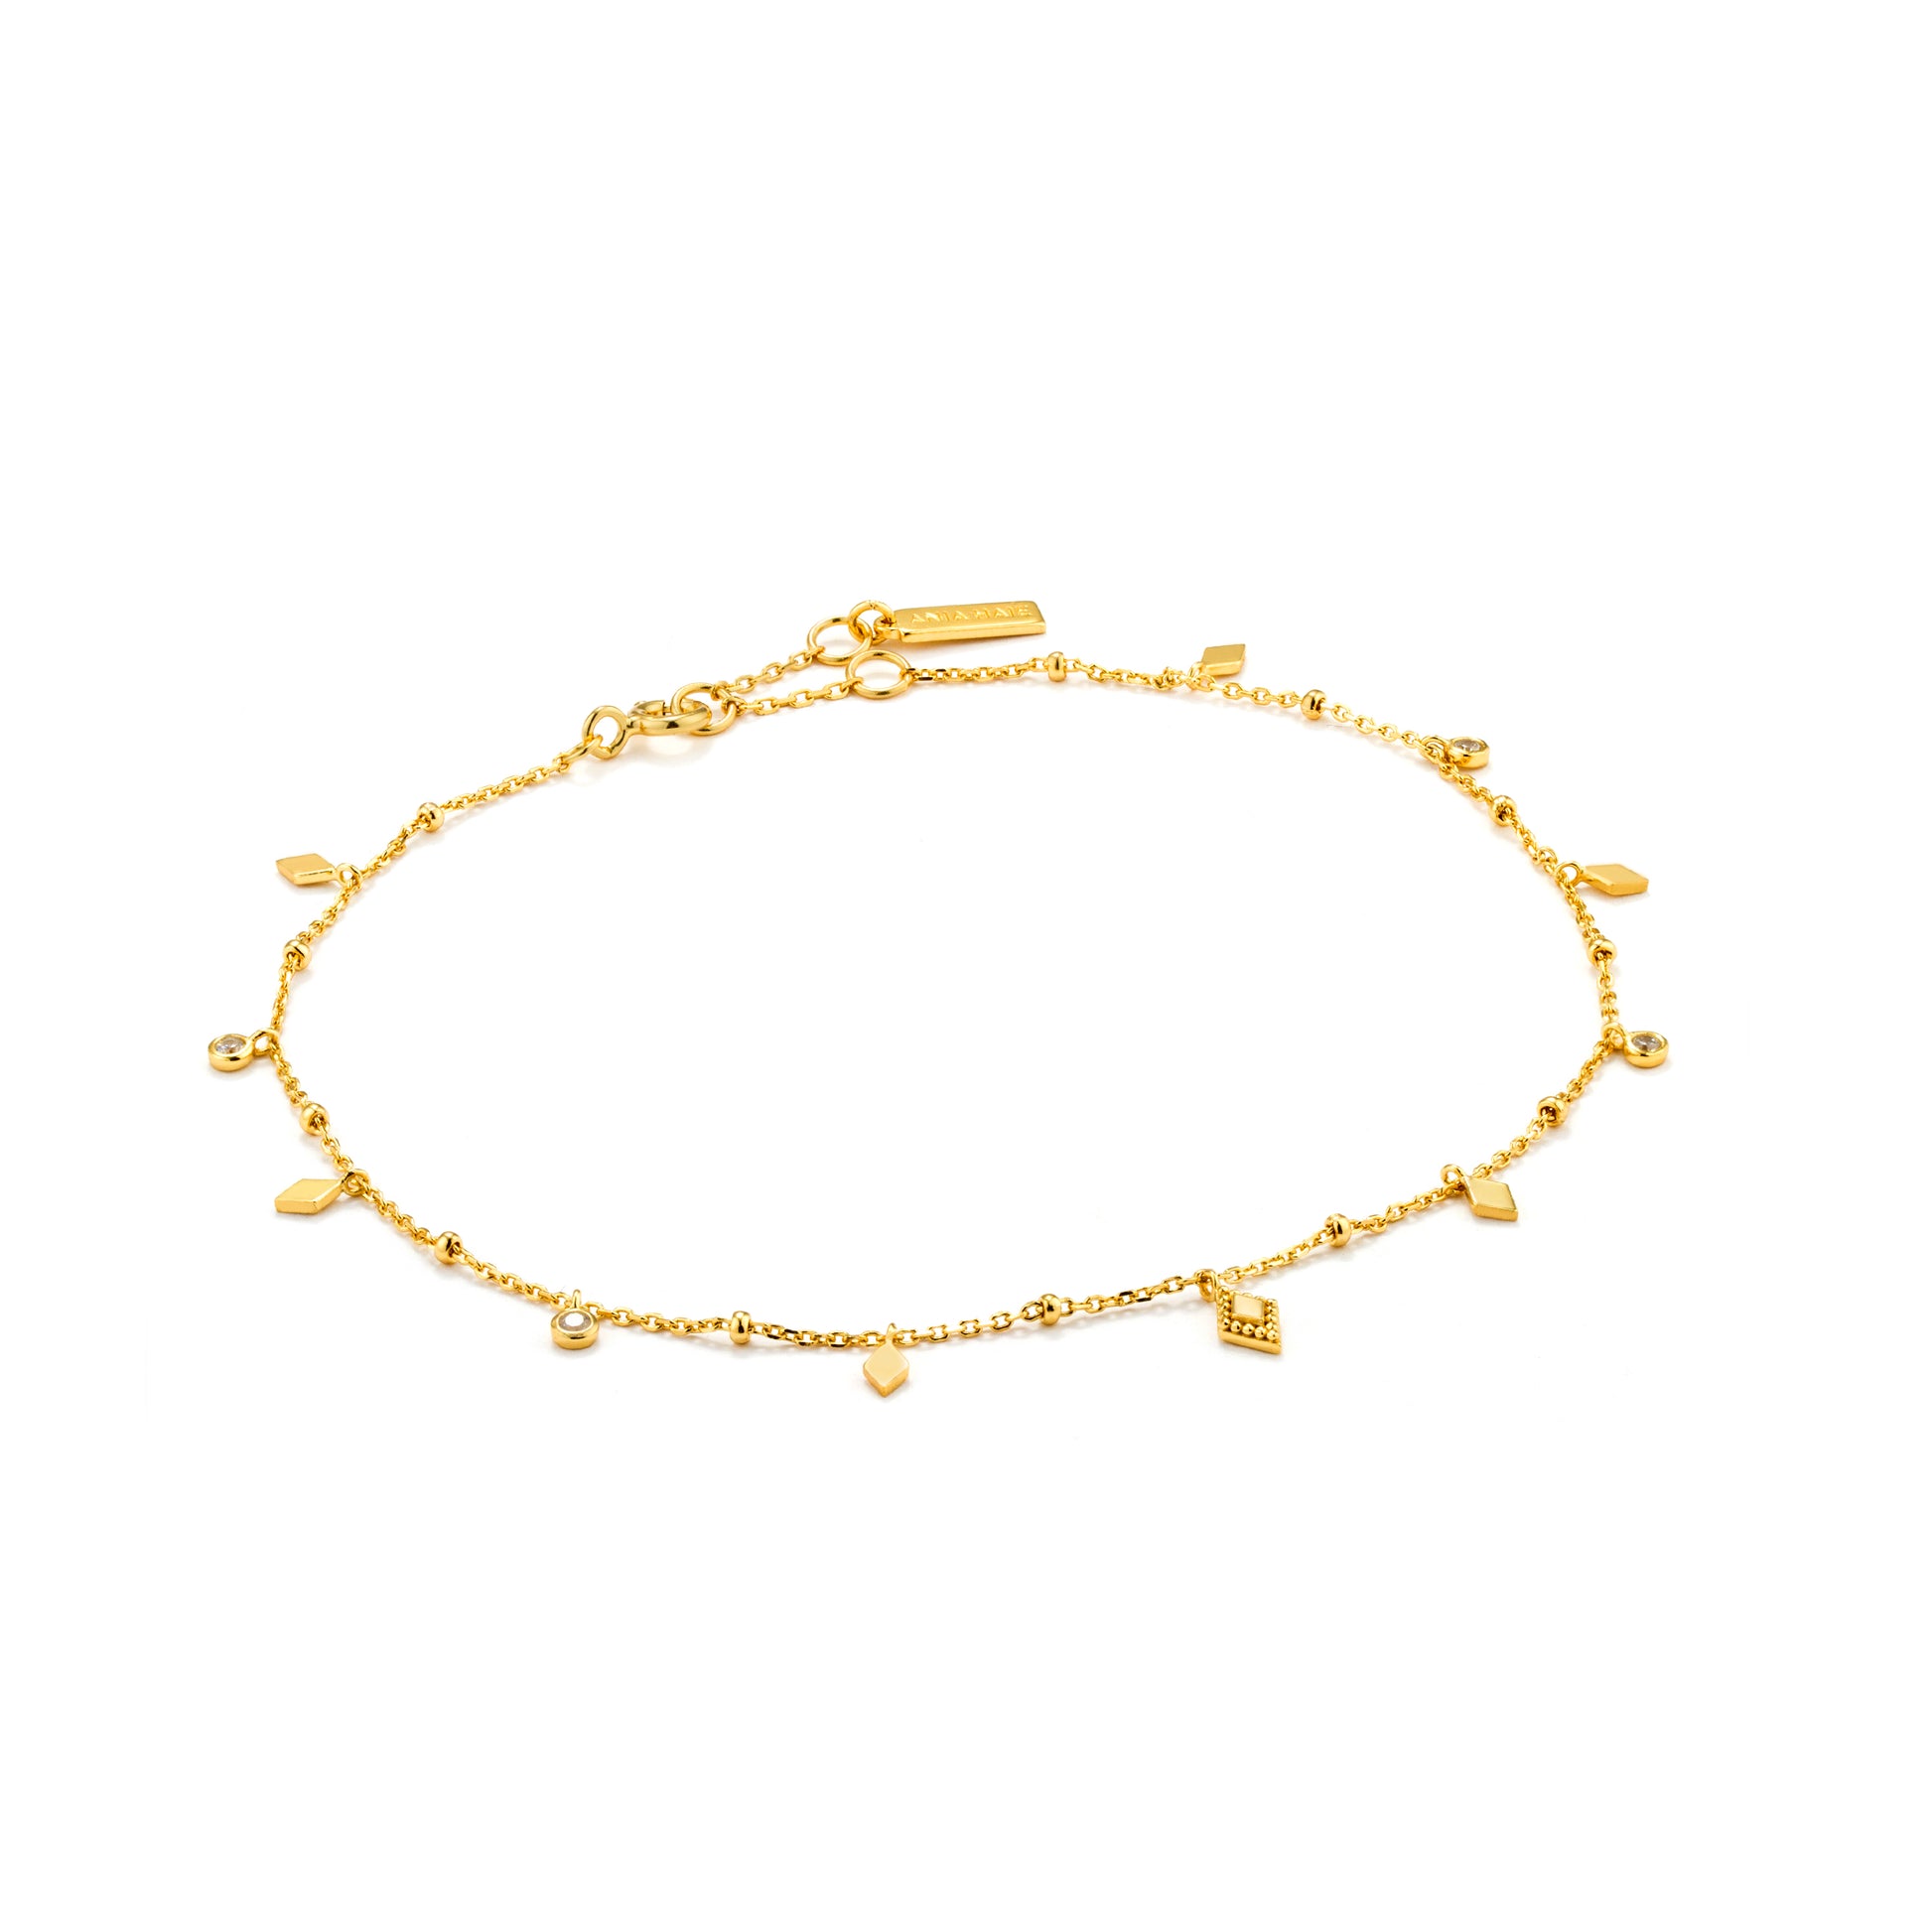 Ania Haie Anklet - Anklets